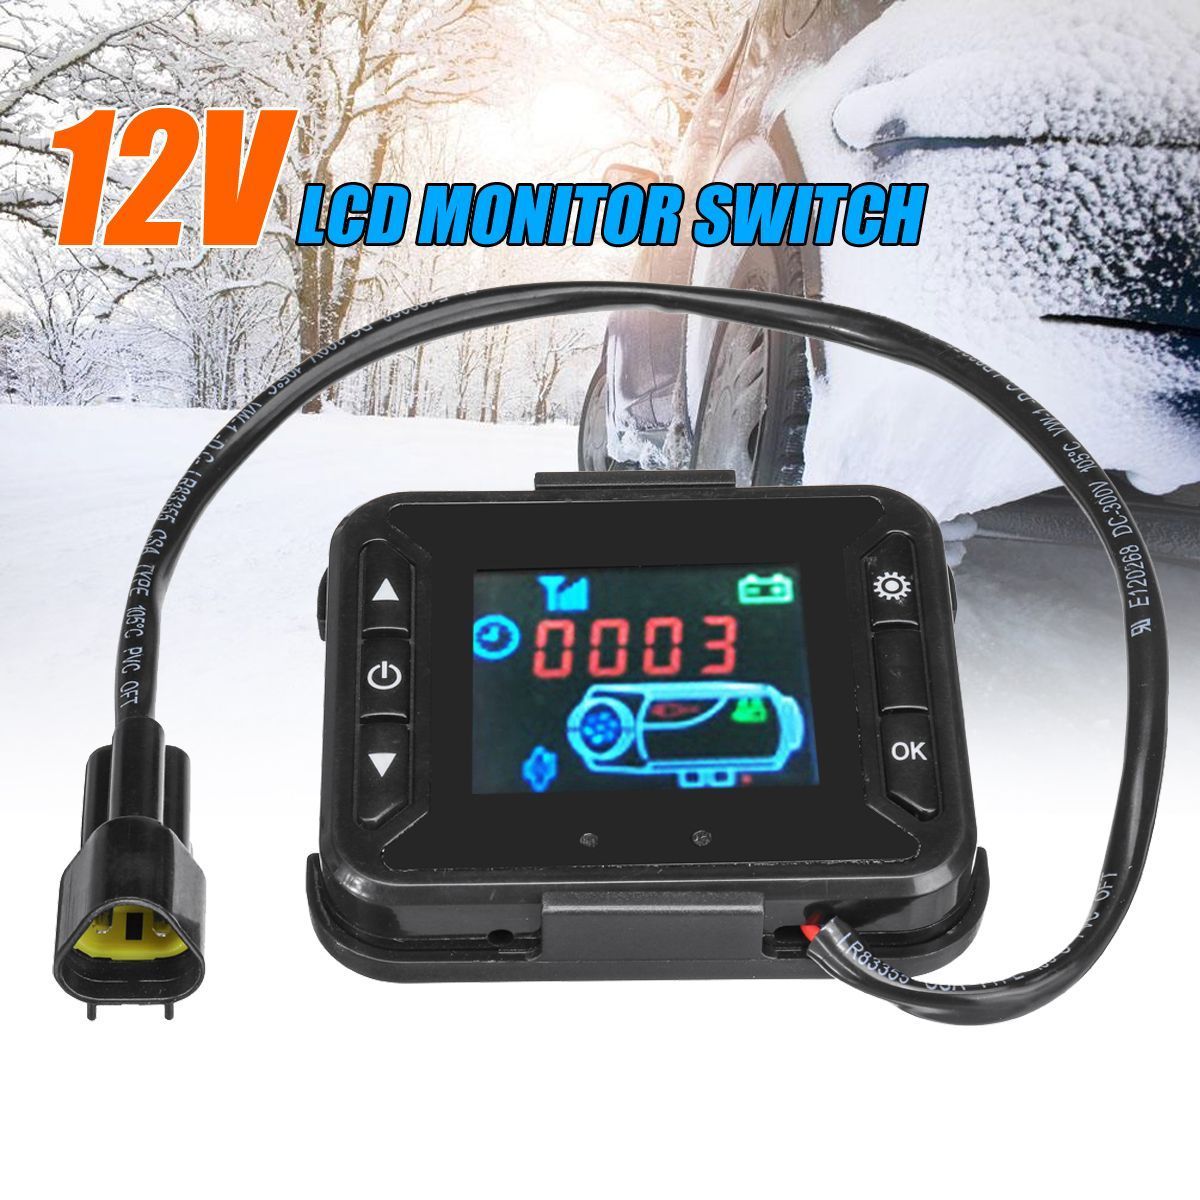 12V-Car-Heater-LCD-Monitor-Switch-Controller-For-Car-Track-Air-Diesel-Heater-1376332